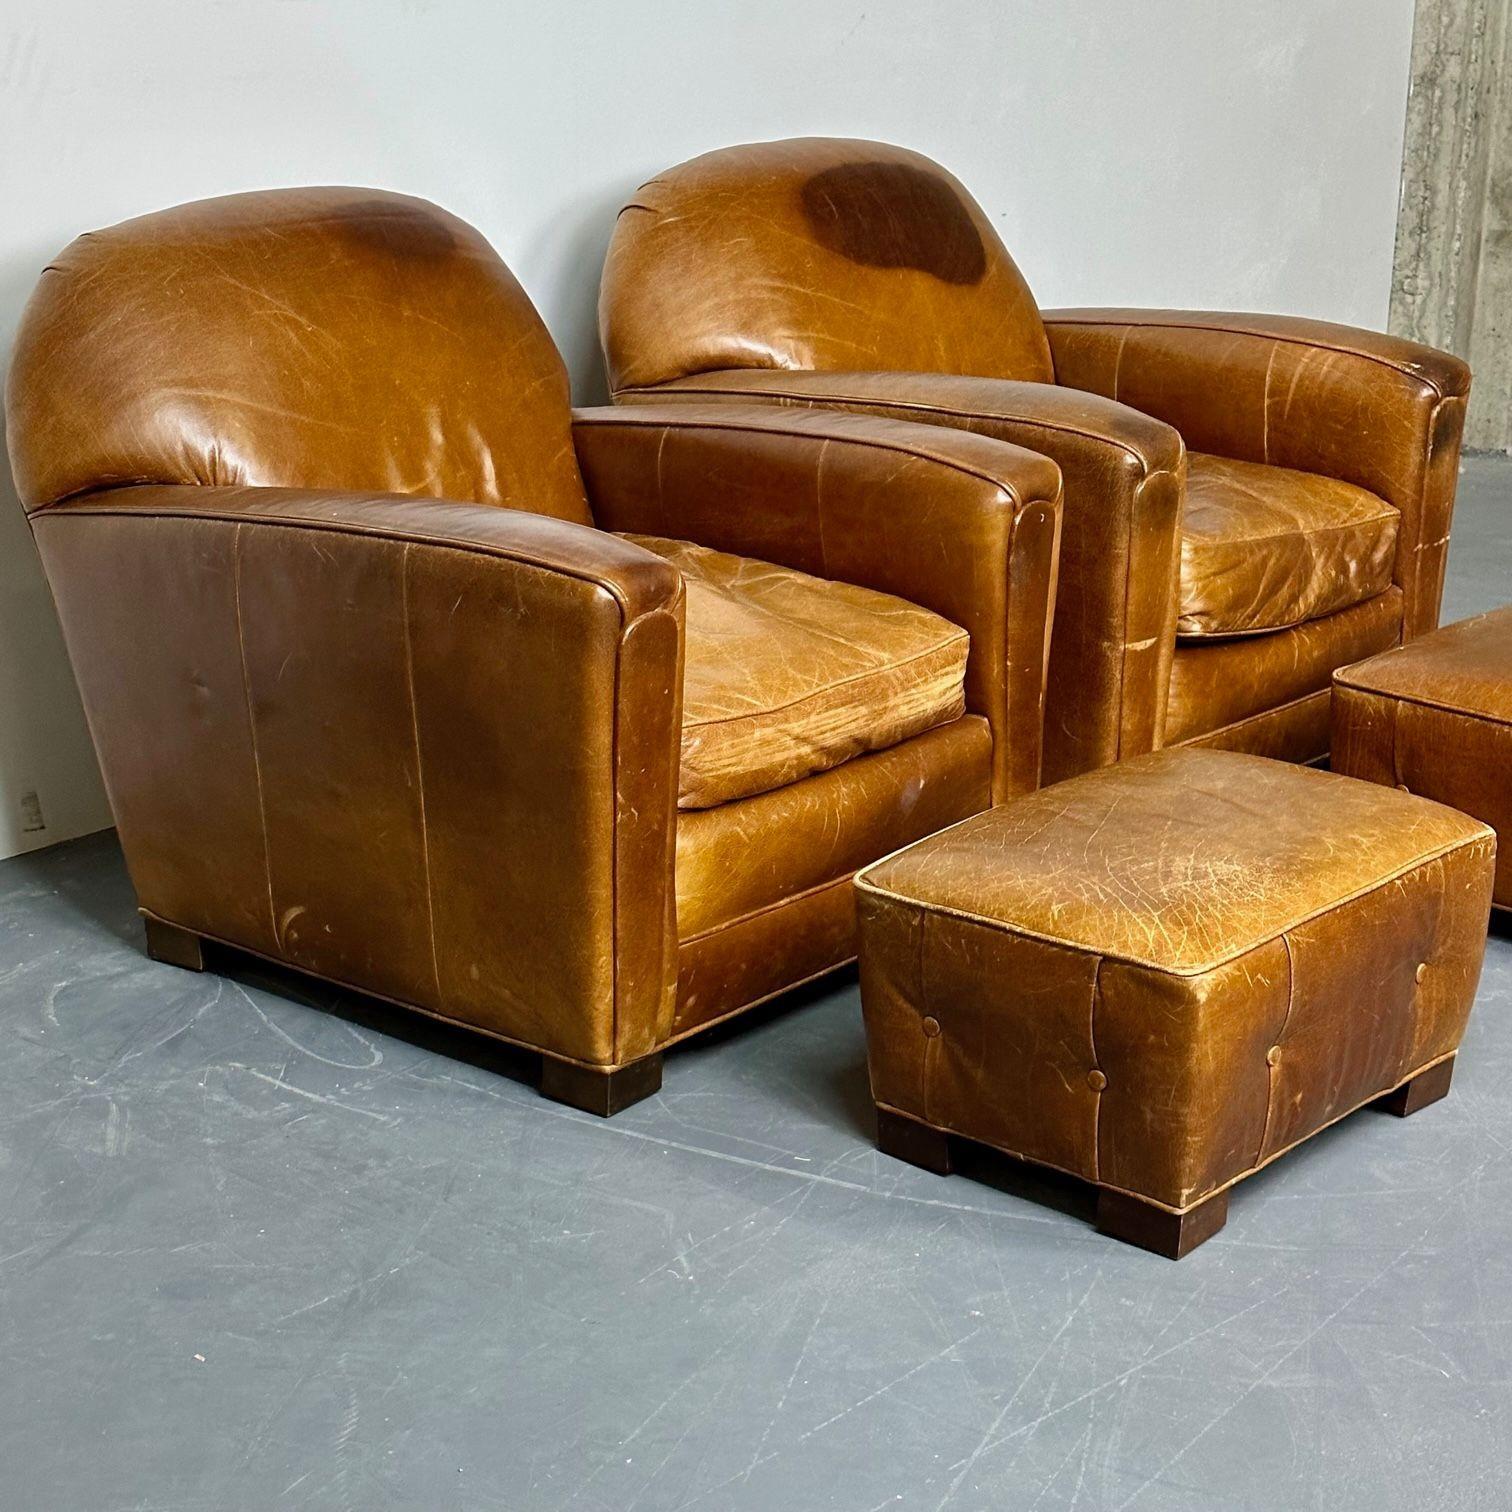 Pair of large Art Deco distressed leather French club / lounge chairs.
 
A fine example of art deco lounge / club chair design accompanied by a rare pair of footstools, sold separately. Large and impressive, these iconic pieces bear the character